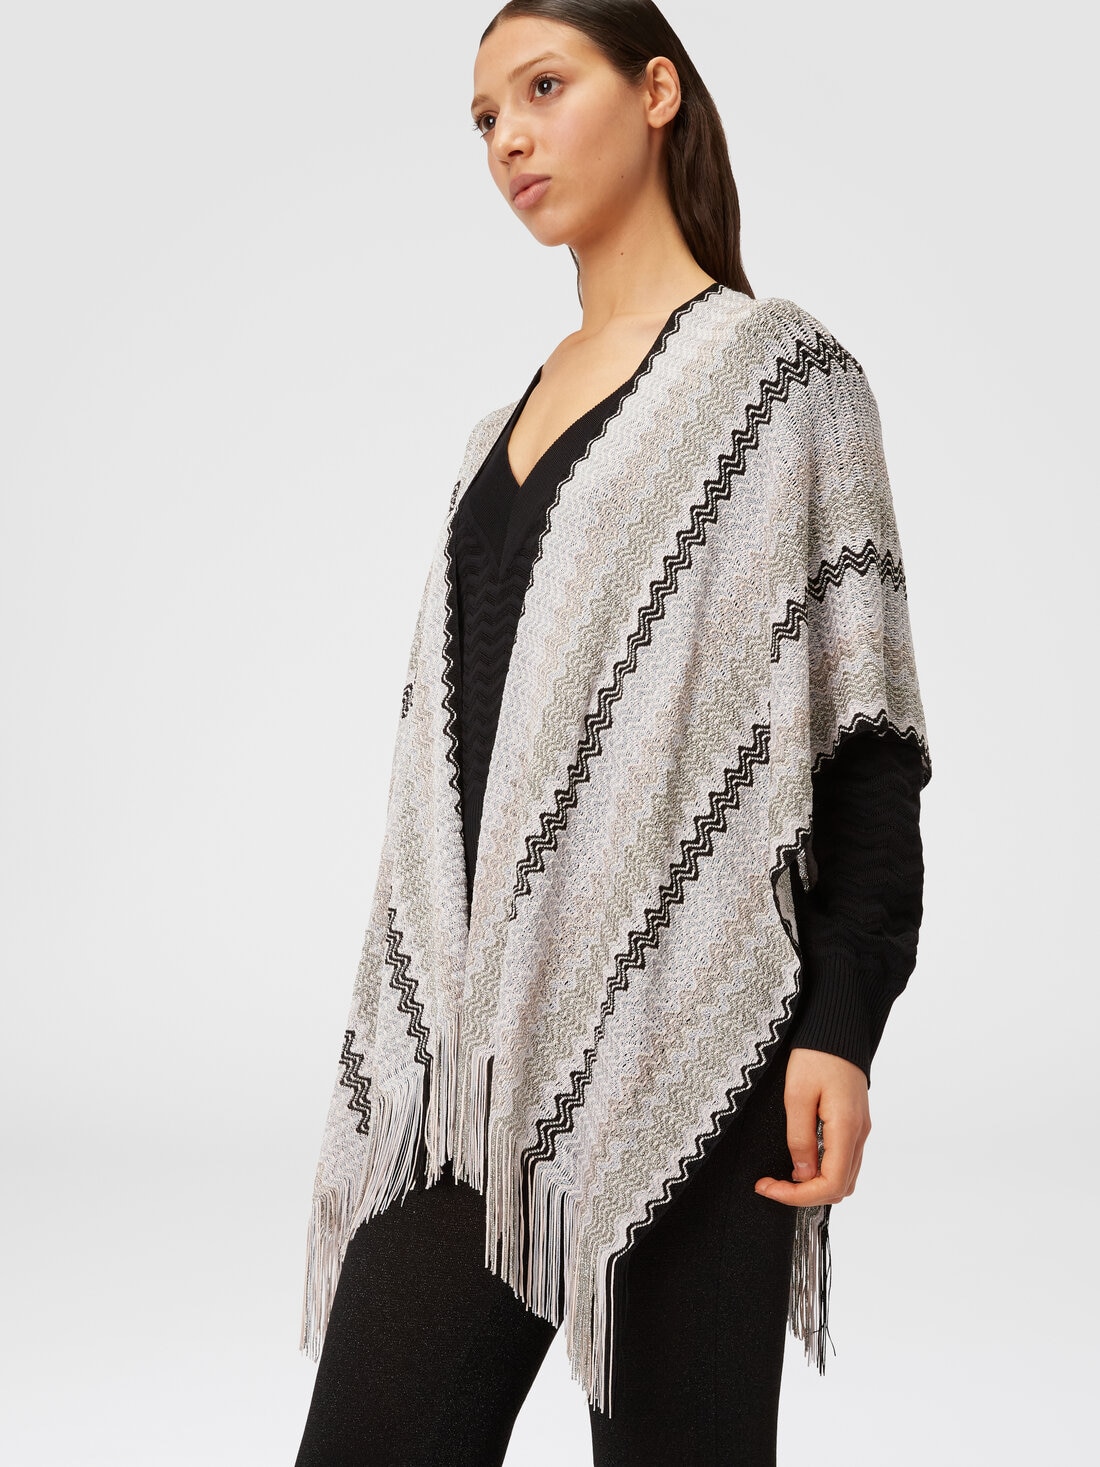 Poncho in viscose blend knit with wave pattern and fringes, Multicoloured  - 8053147141213 - 3